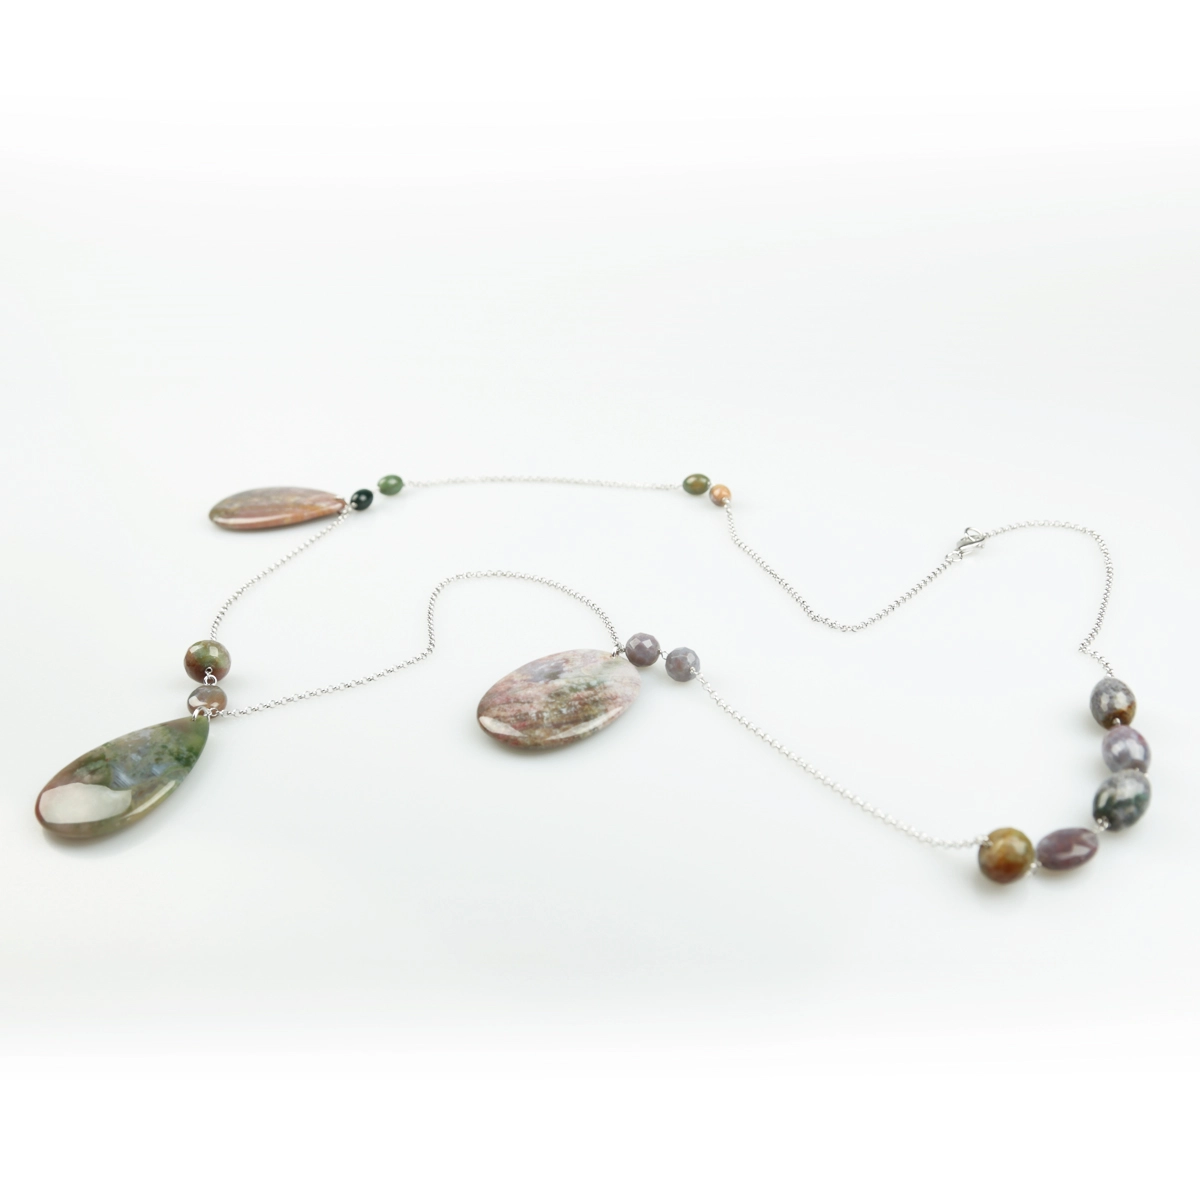 NECKLACE STRUNG WITH PENDANTS OF AGATE INDIA PATRICIA GARCIA BUC259